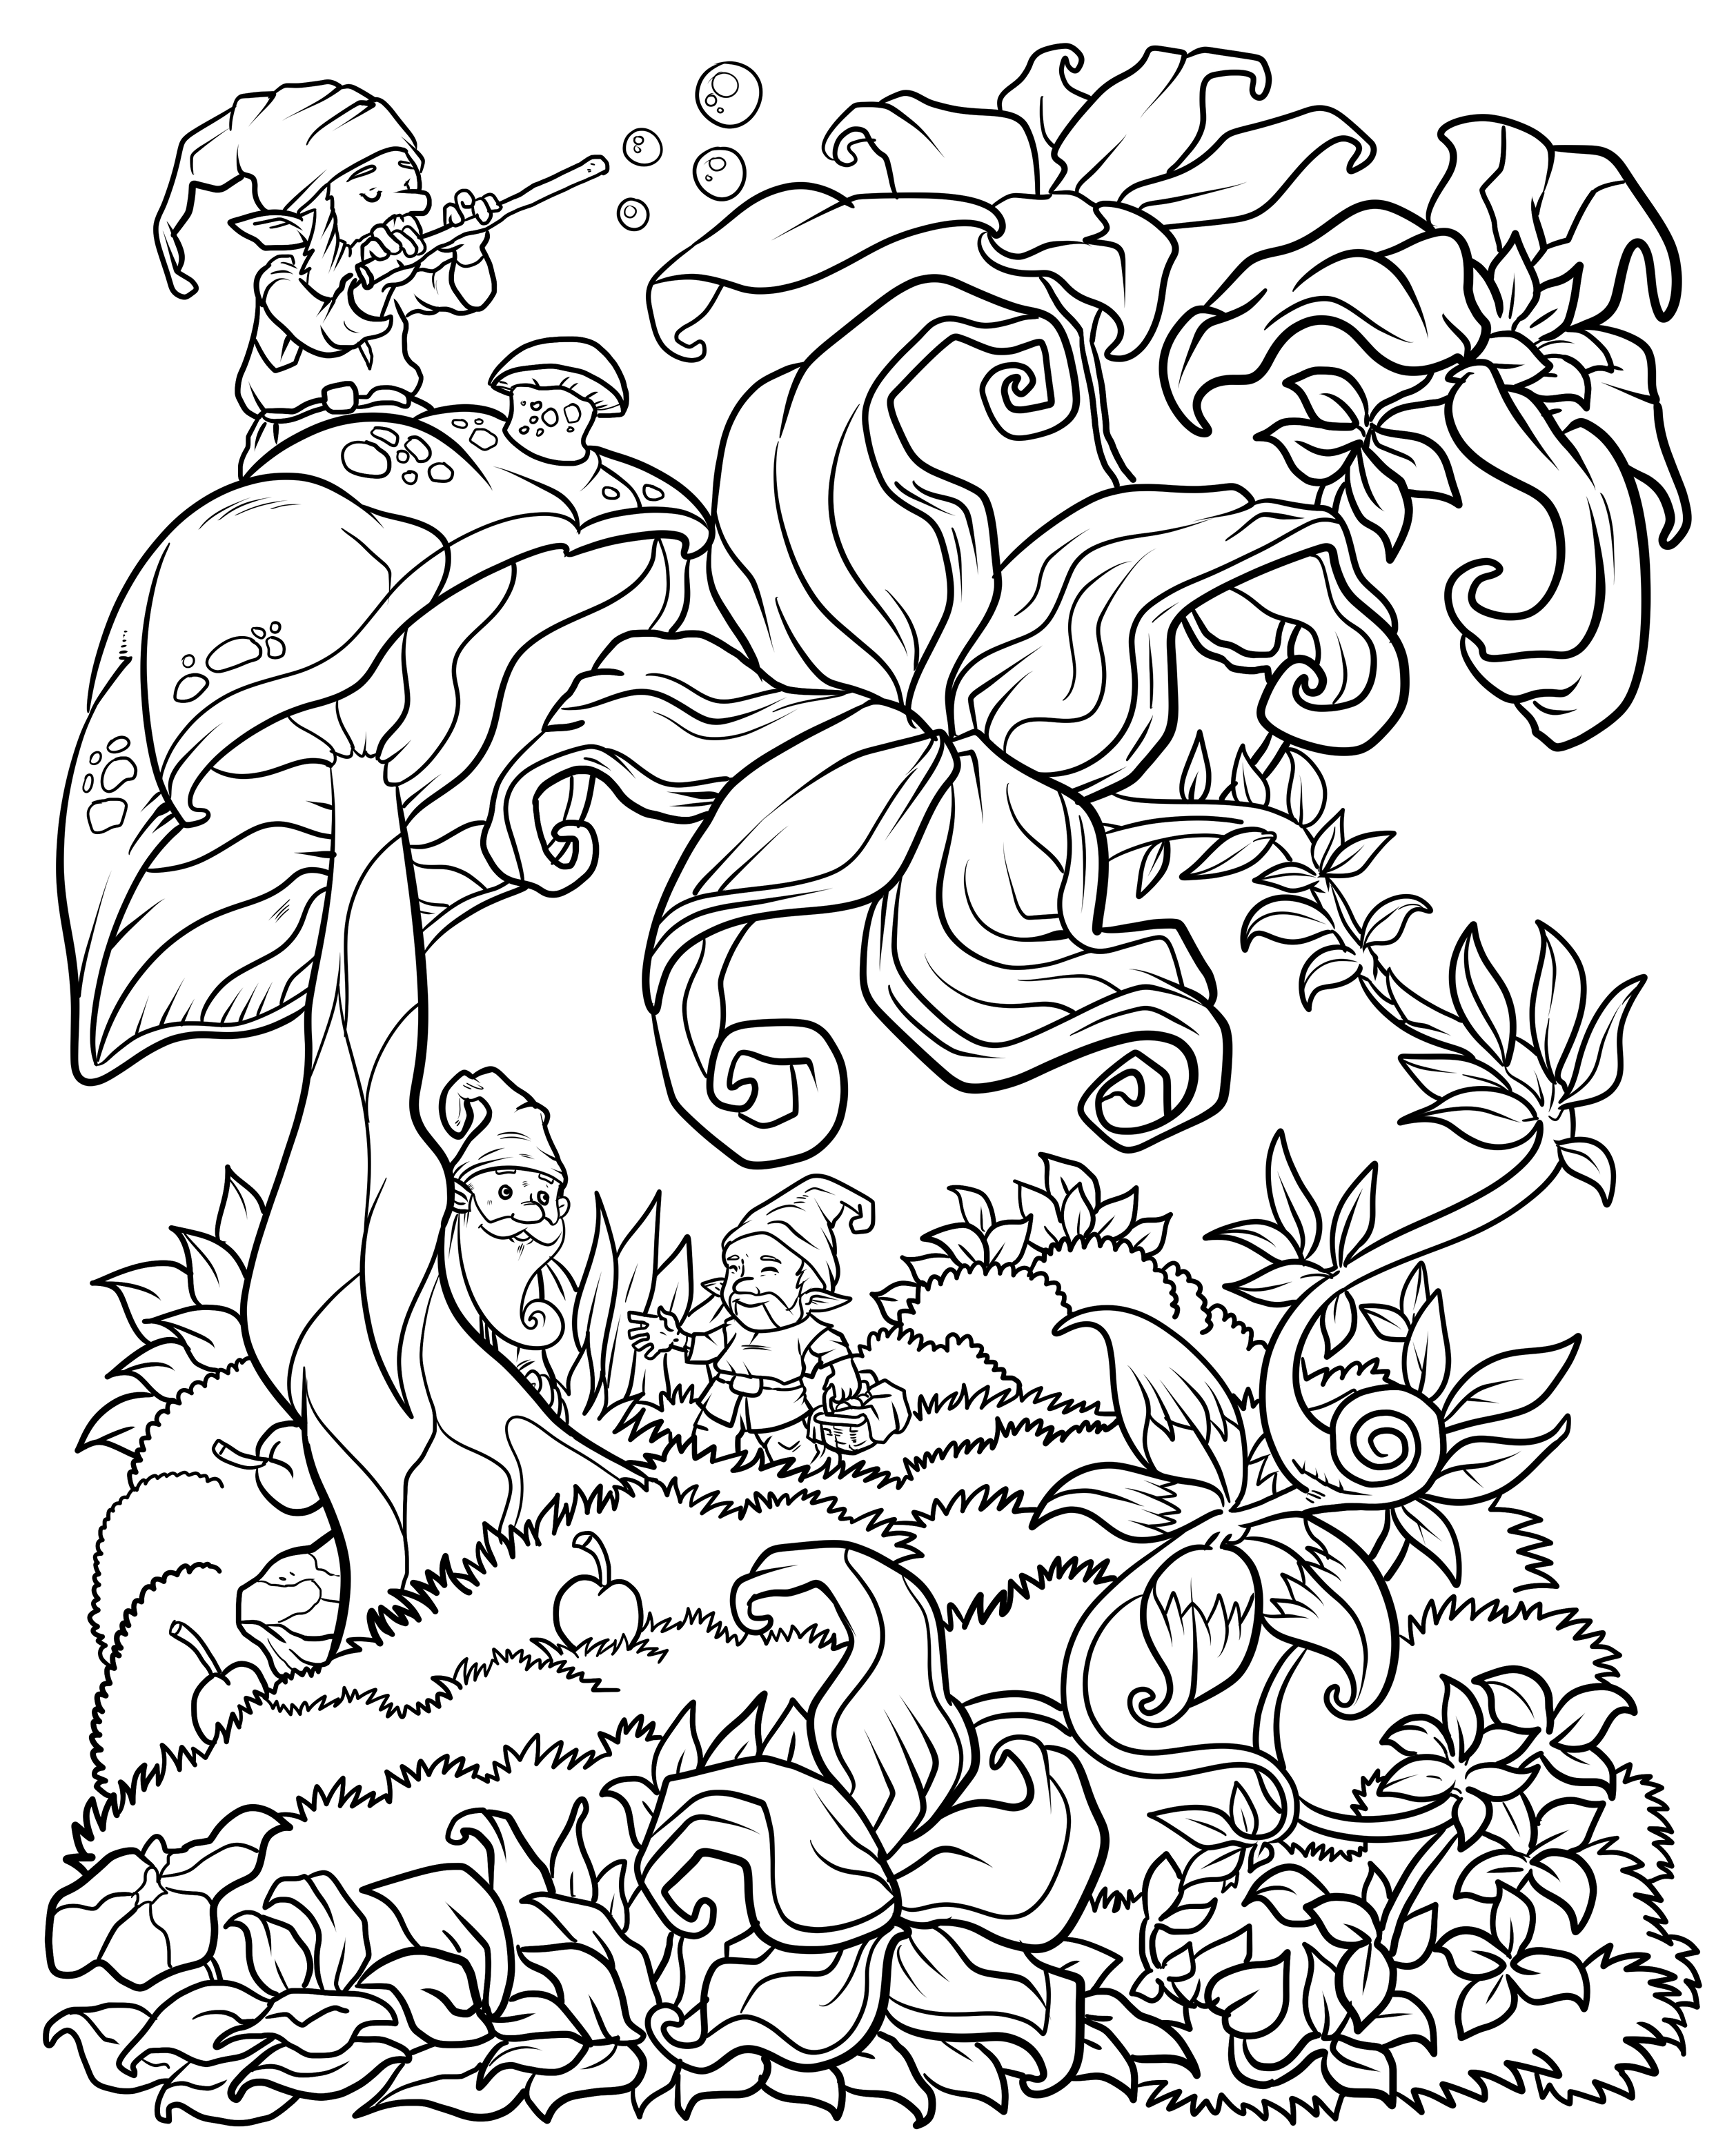 Printable Adult Coloring Pages Adult Coloring Book Pages Cartoon ...